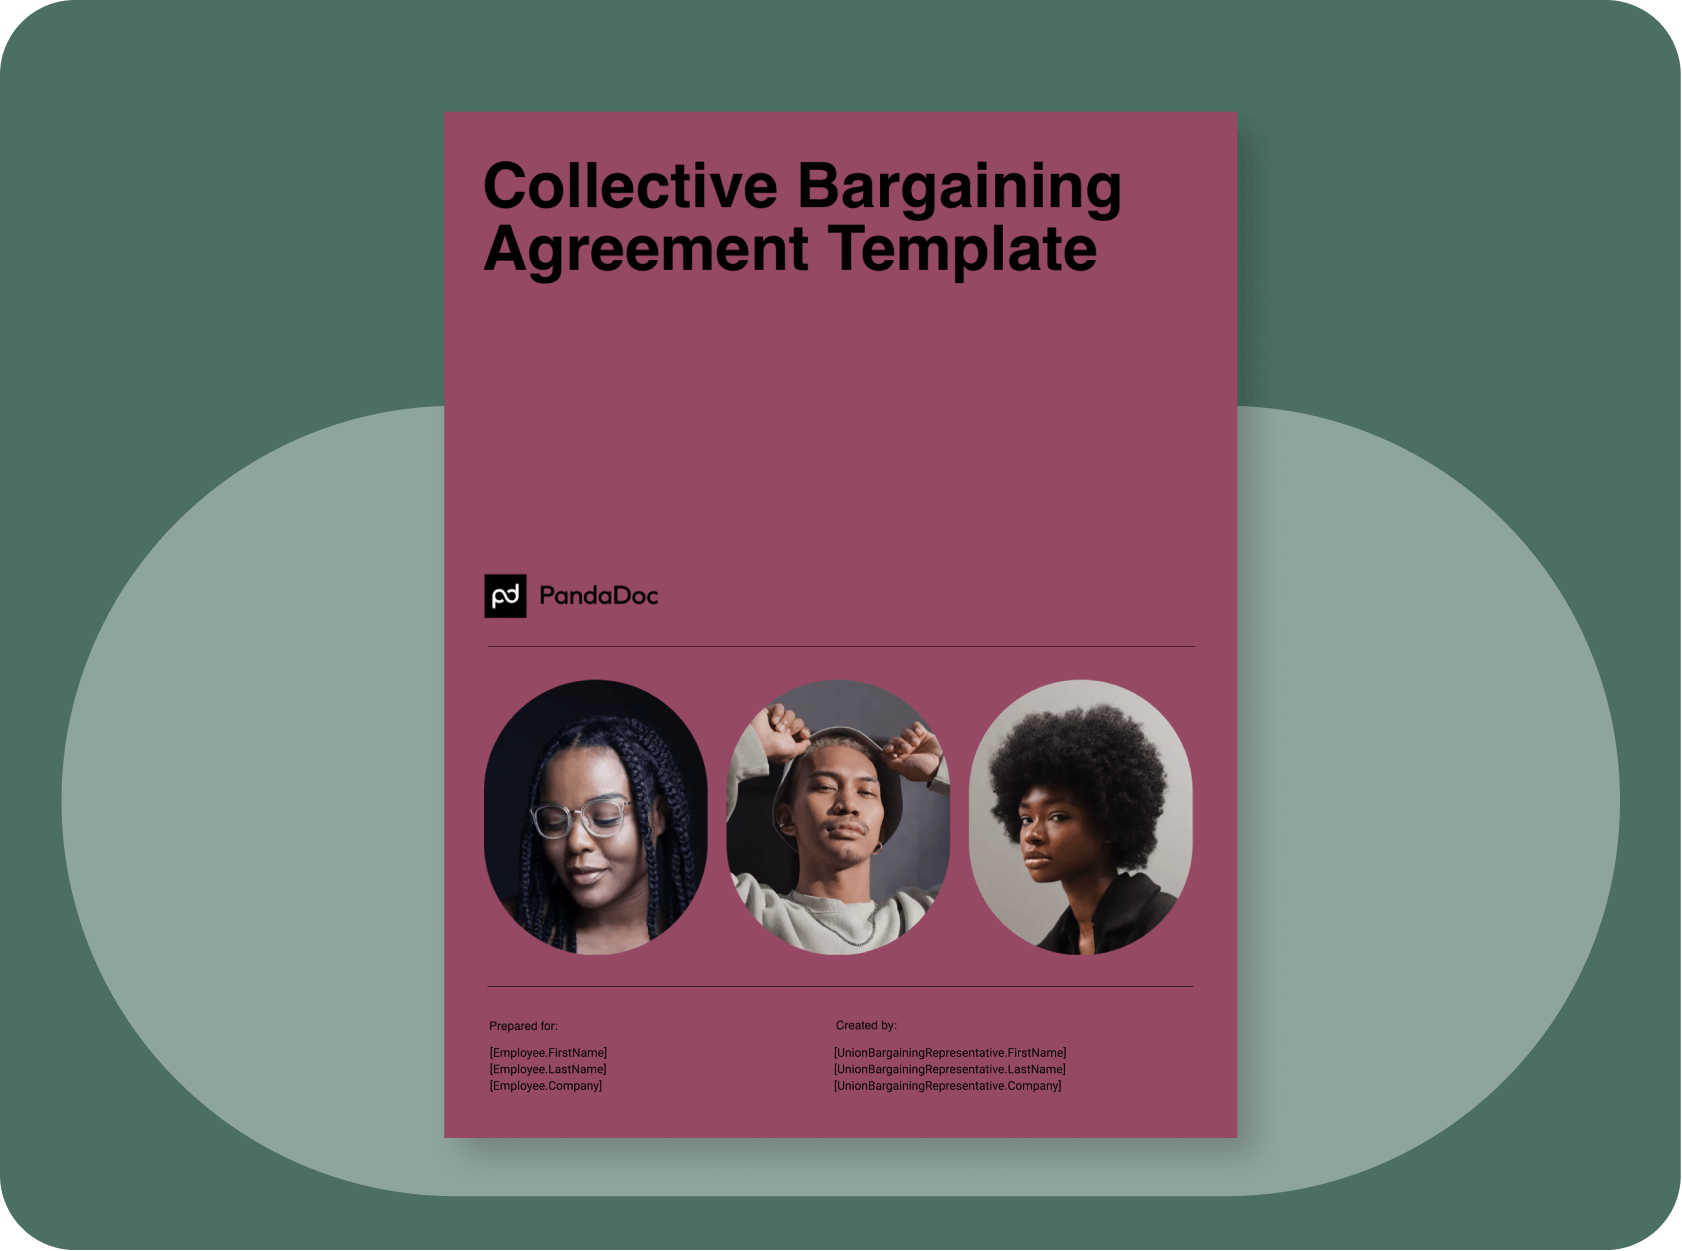 Collective Bargaining Agreement Template PandaDoc